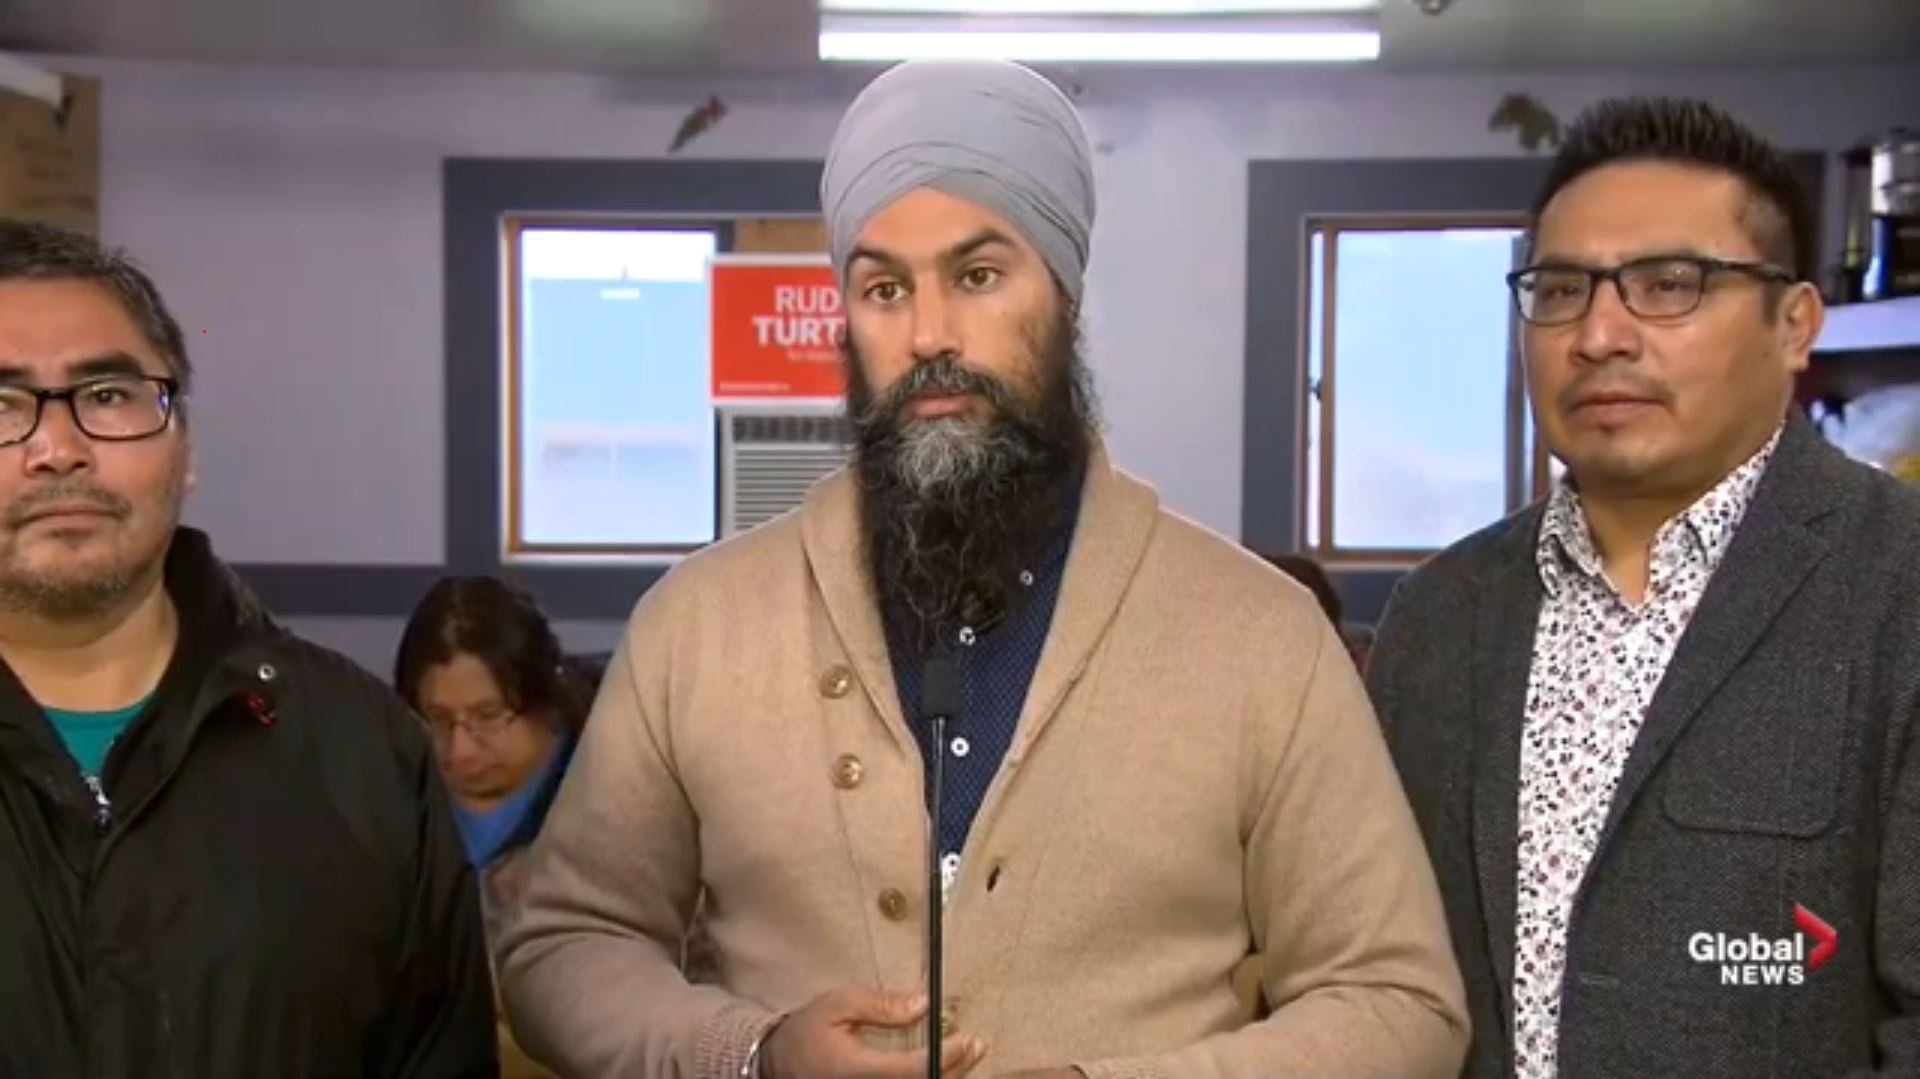 NDP leader Jagmeet Singh takes questions from reporters in Grassy Narrows